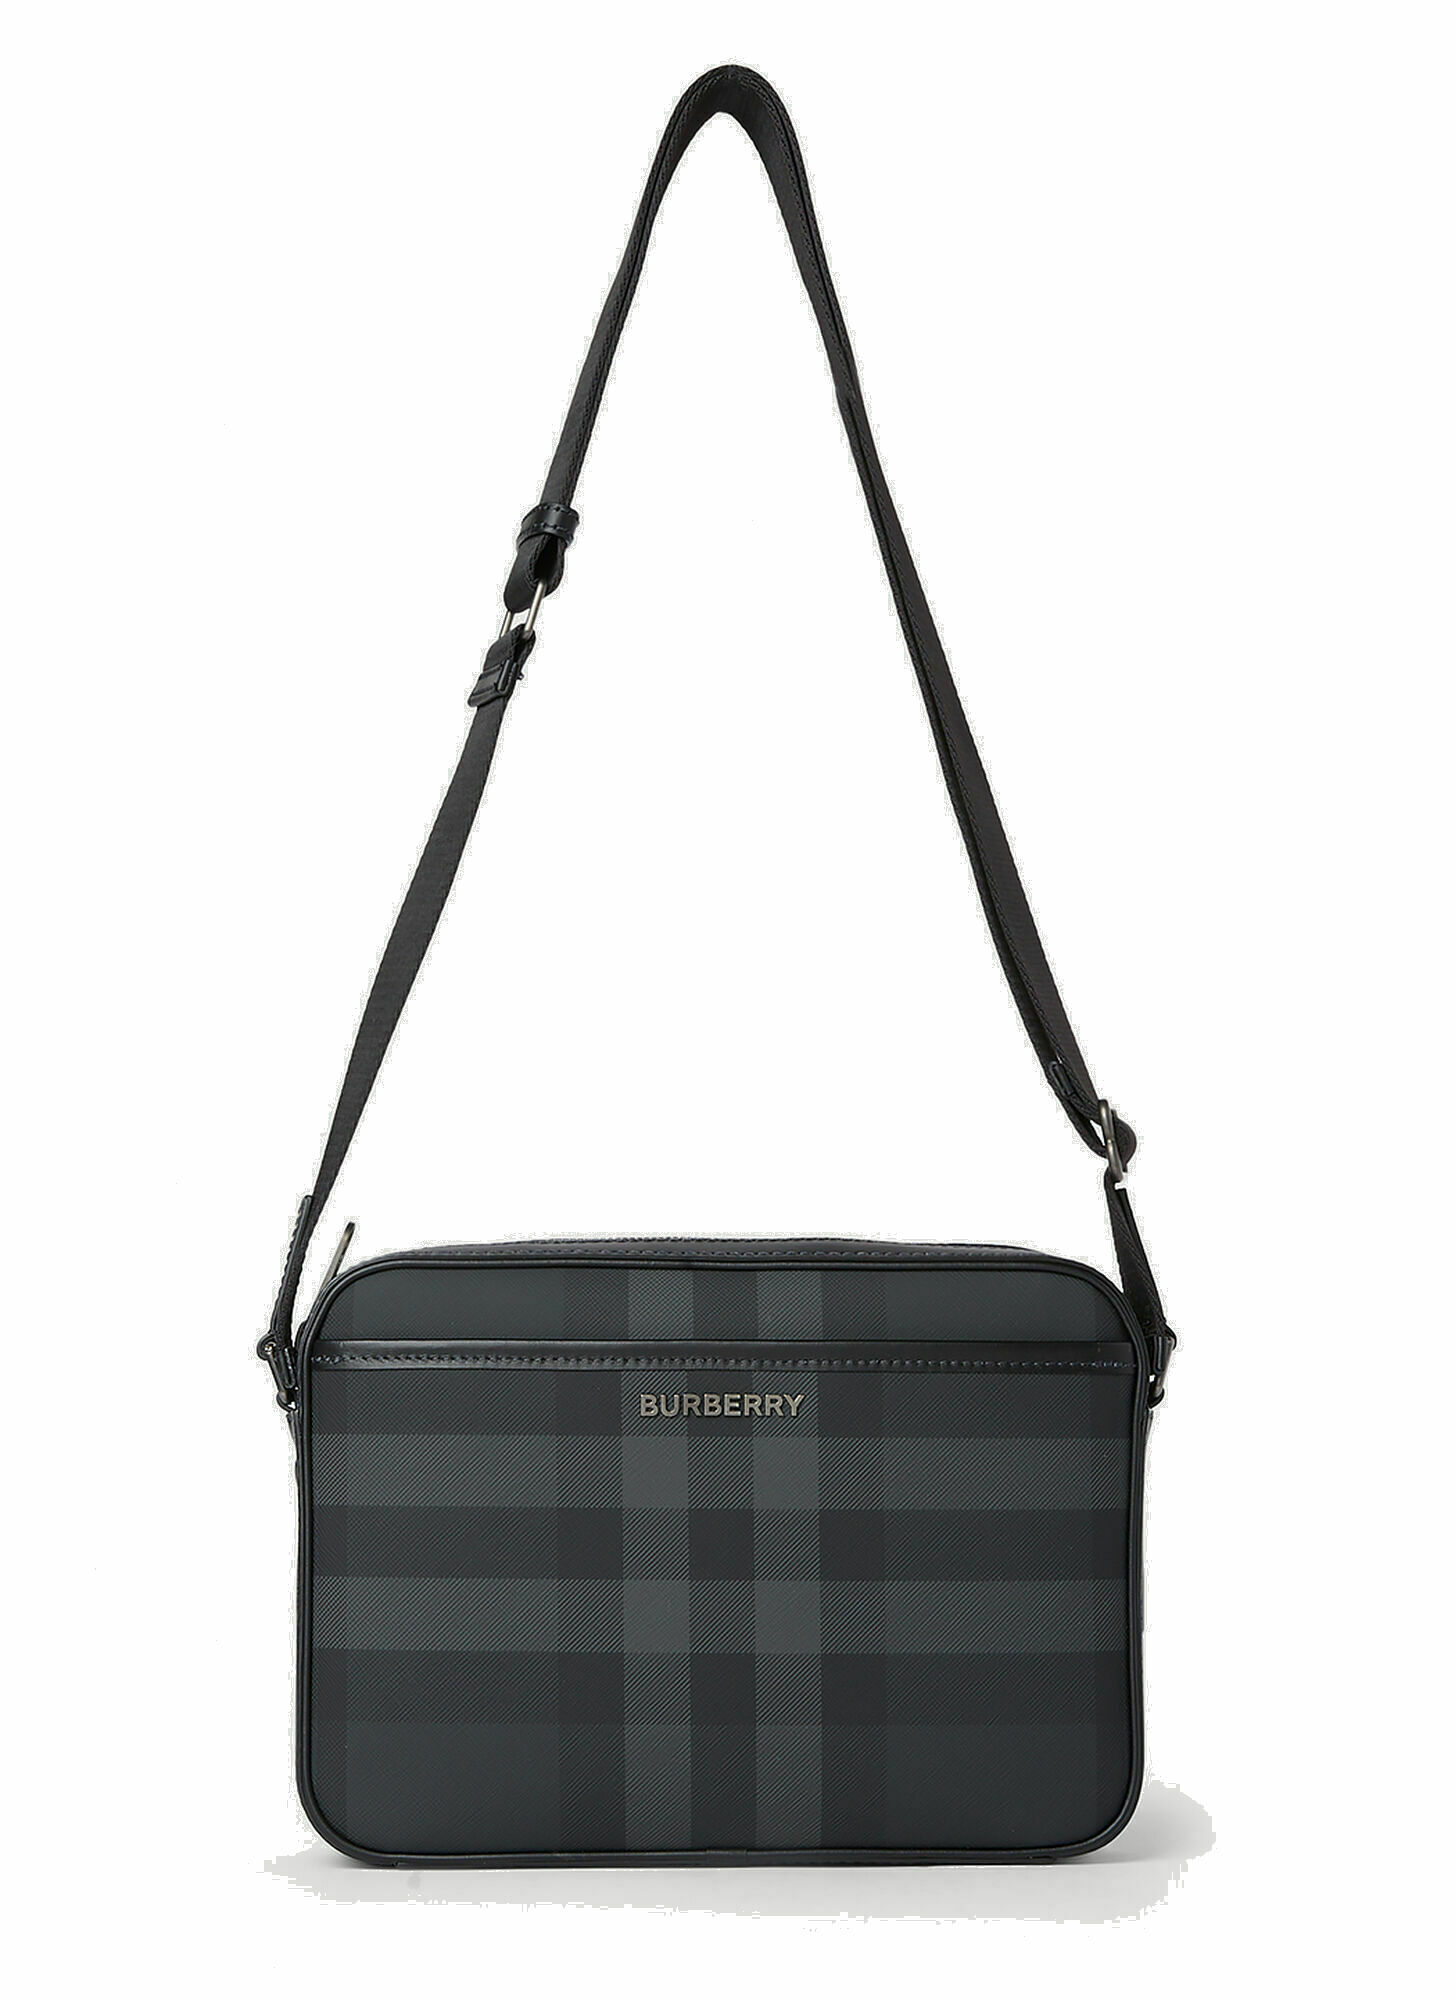 Photo: Burberry - Muswell Shoulder Bag in Black